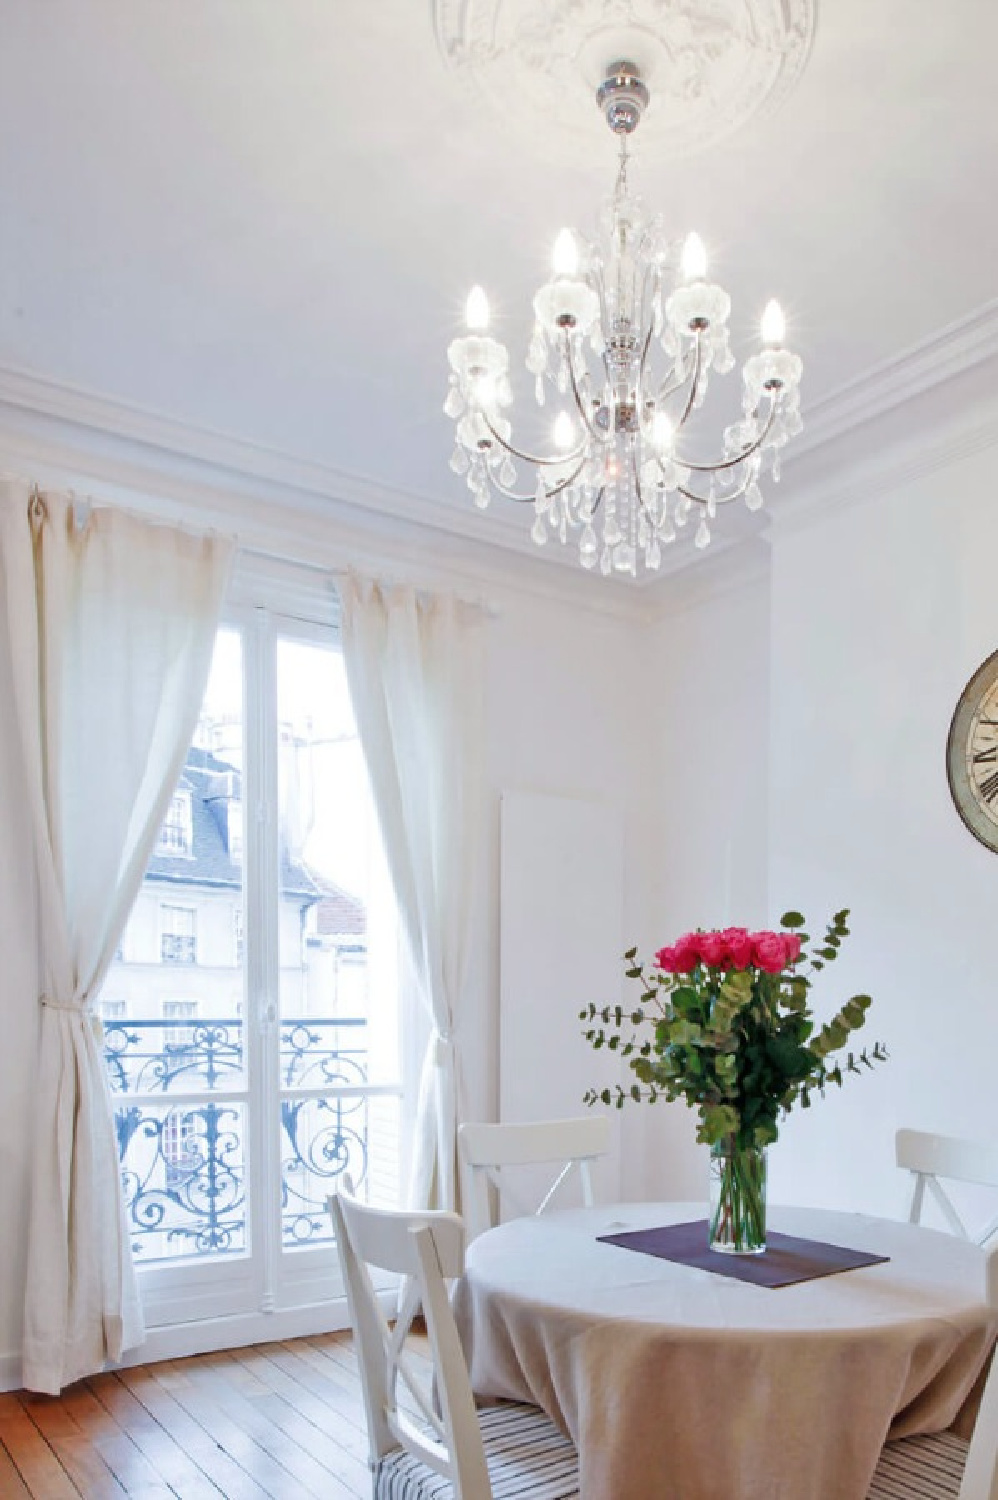 Charming dining area and crystal chandelier in a dining area with French doors to balcony in a Paris apartment near Notre Dame - Haven In.